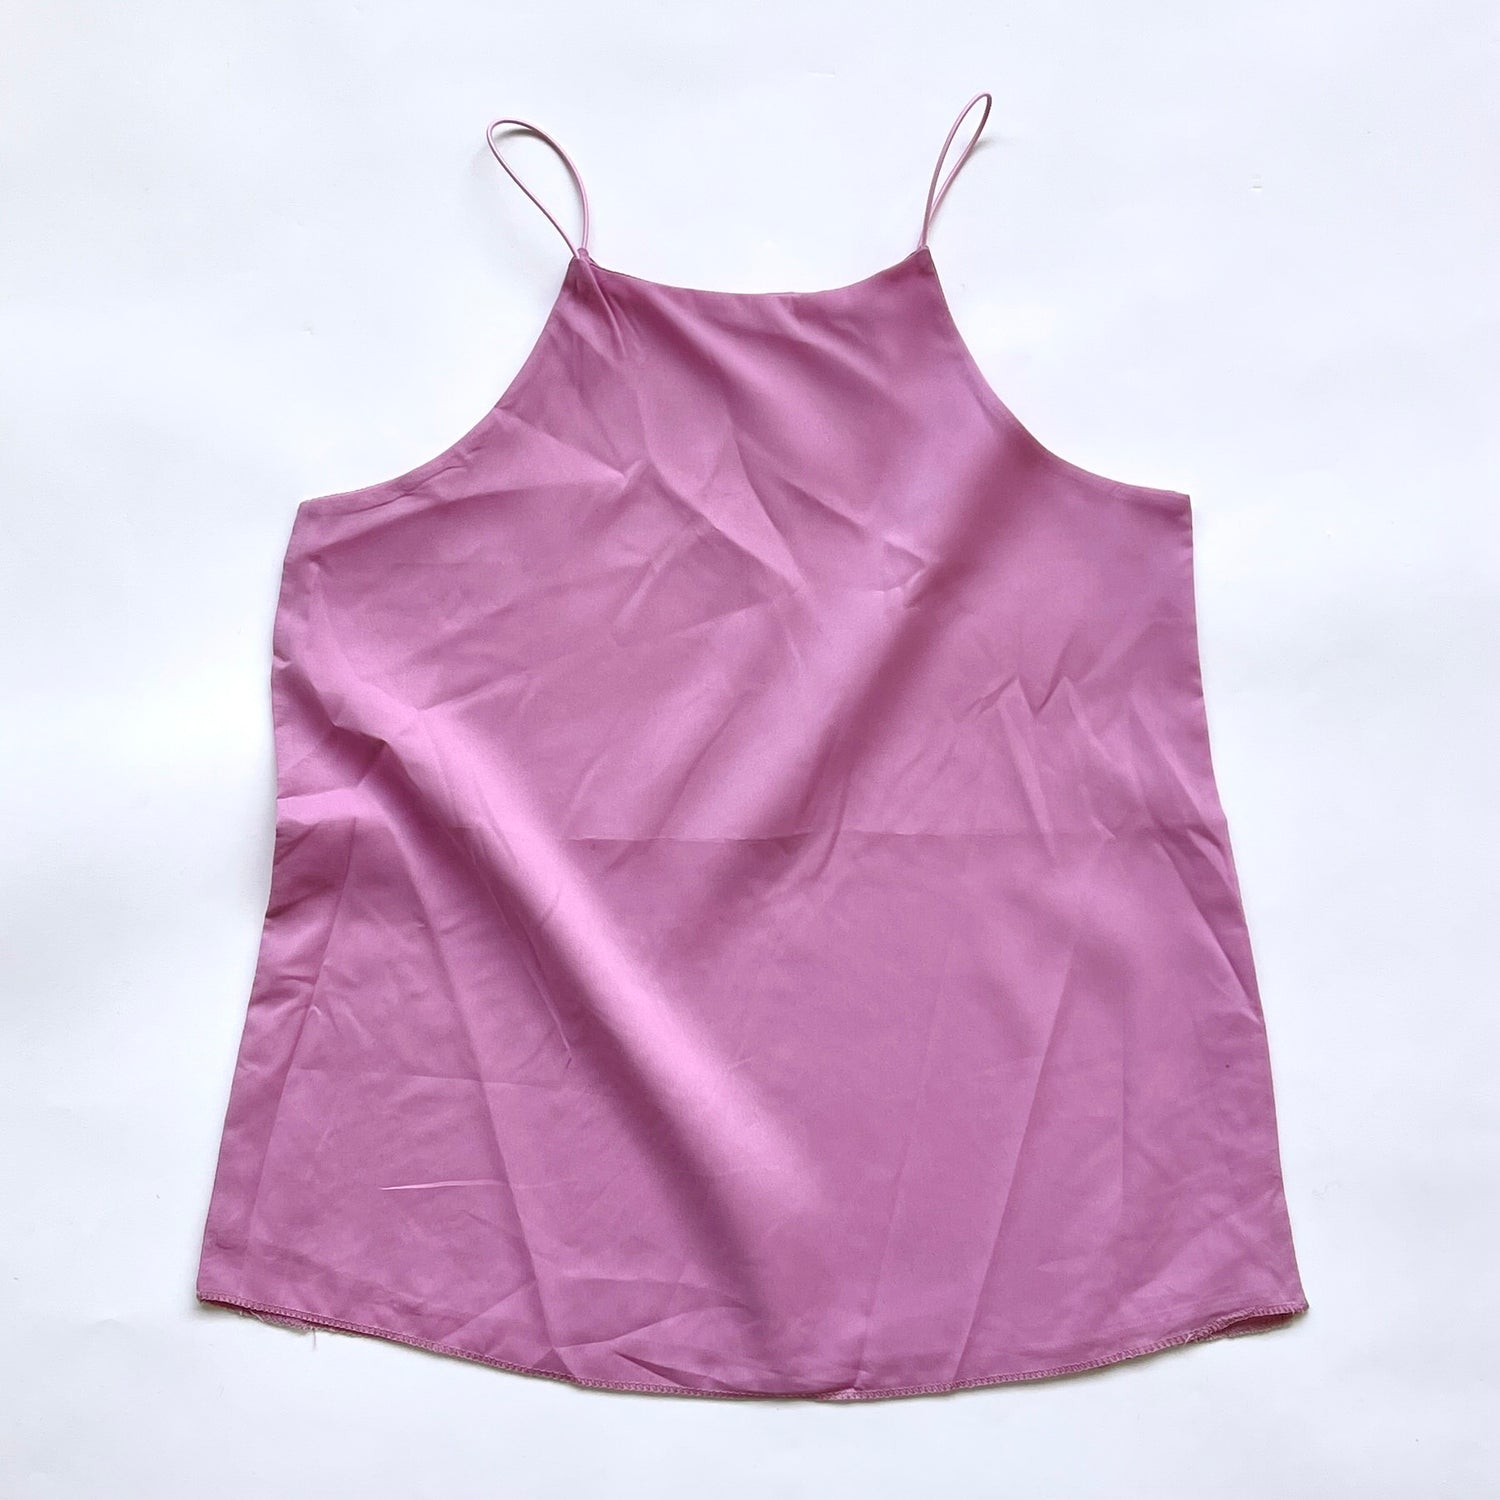 【SAMPLE】camisole tops / pink